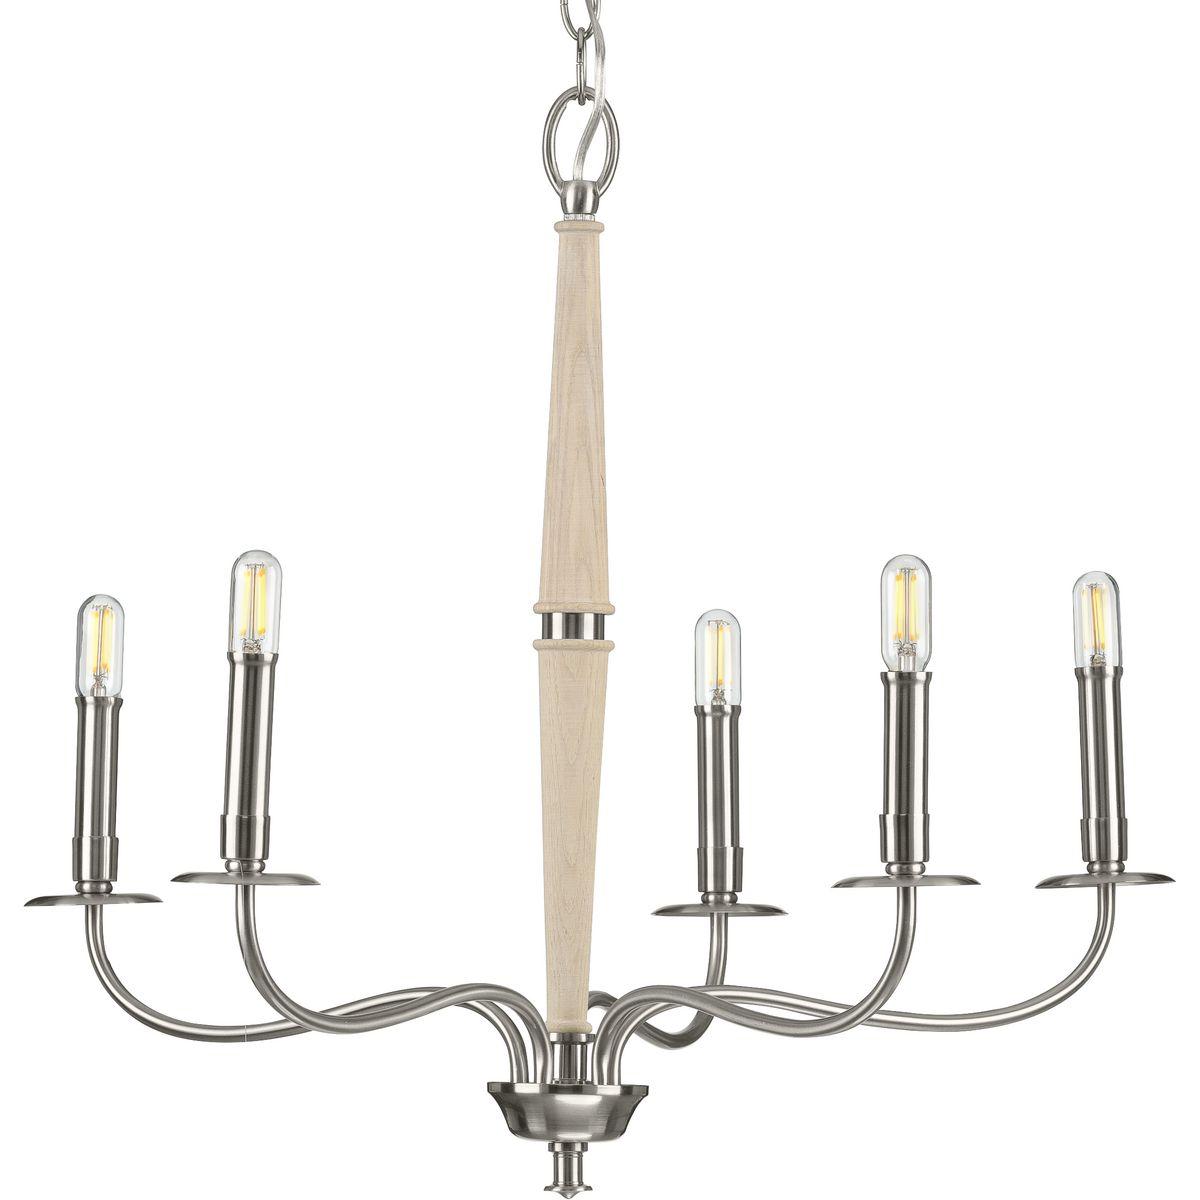 Hubbell P400199-009 This versatile chandelier from the Durrell Collection will easily find a home in a variety of settings in need of generous illumination. Light bases reminiscent of vintage candlesticks are coated in a beautiful brushed nickel finish and appear to float ar